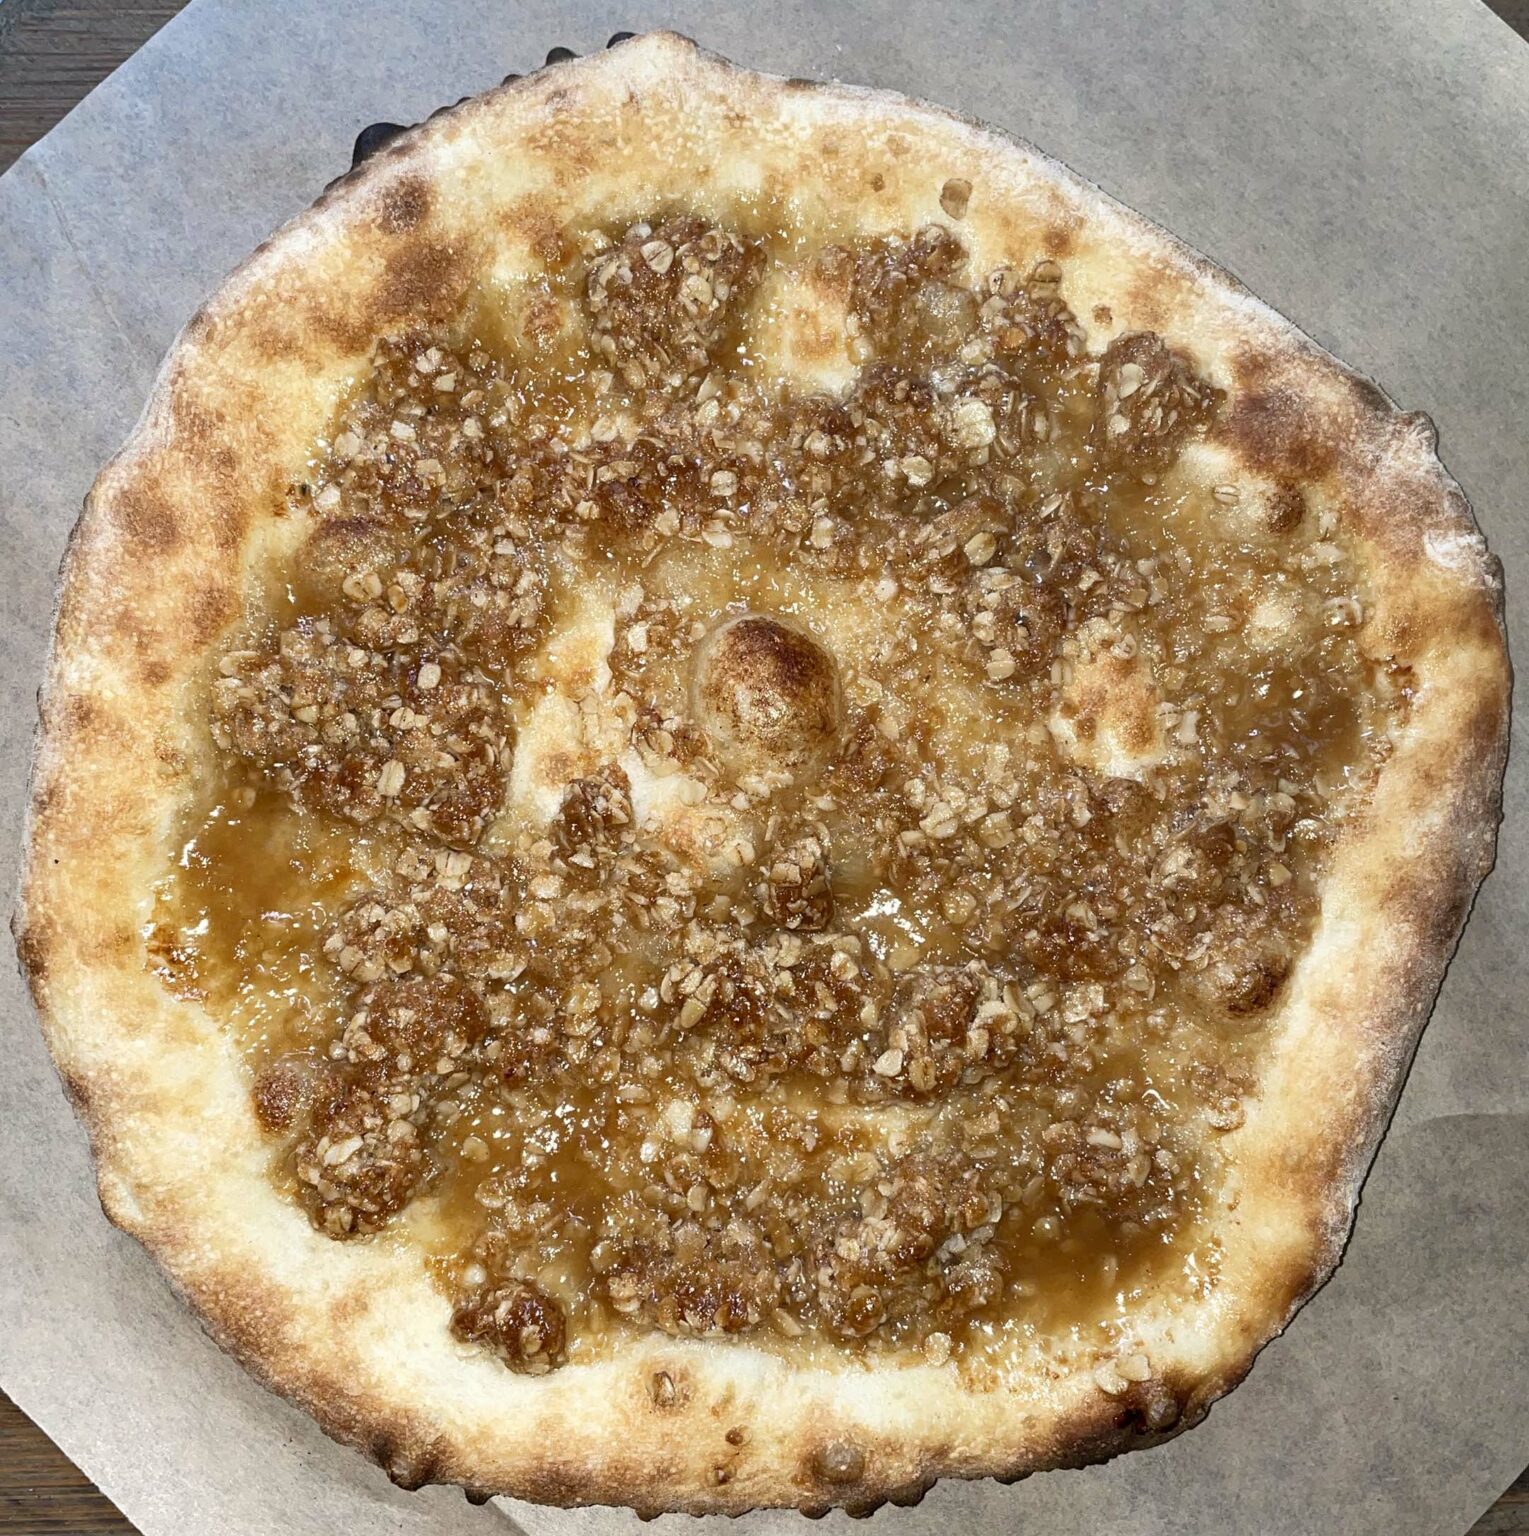 Sugar Maple Dessert Pizza at Log Home Wood Fired Pizza, McGregor, MN, Food Truck, Catering